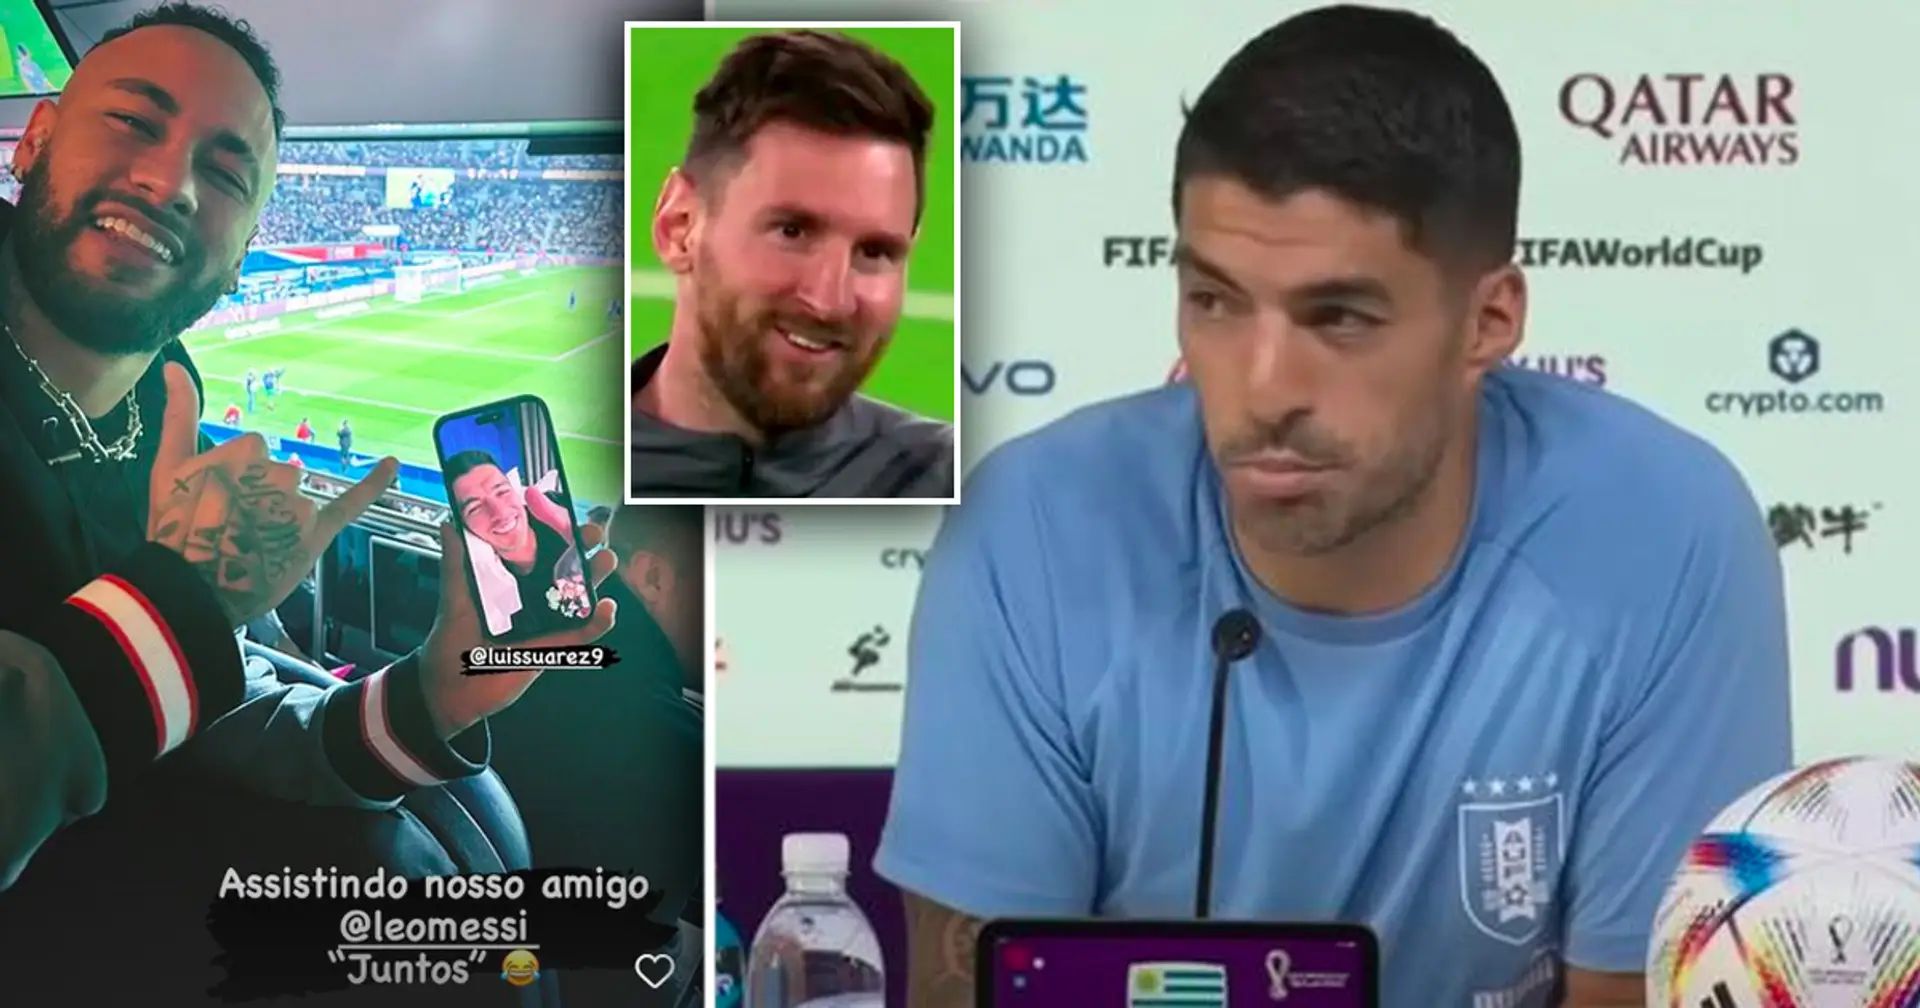 'Watching our friend Leo together': Neymar calls Suarez during PSG game, Uruguayan reacts